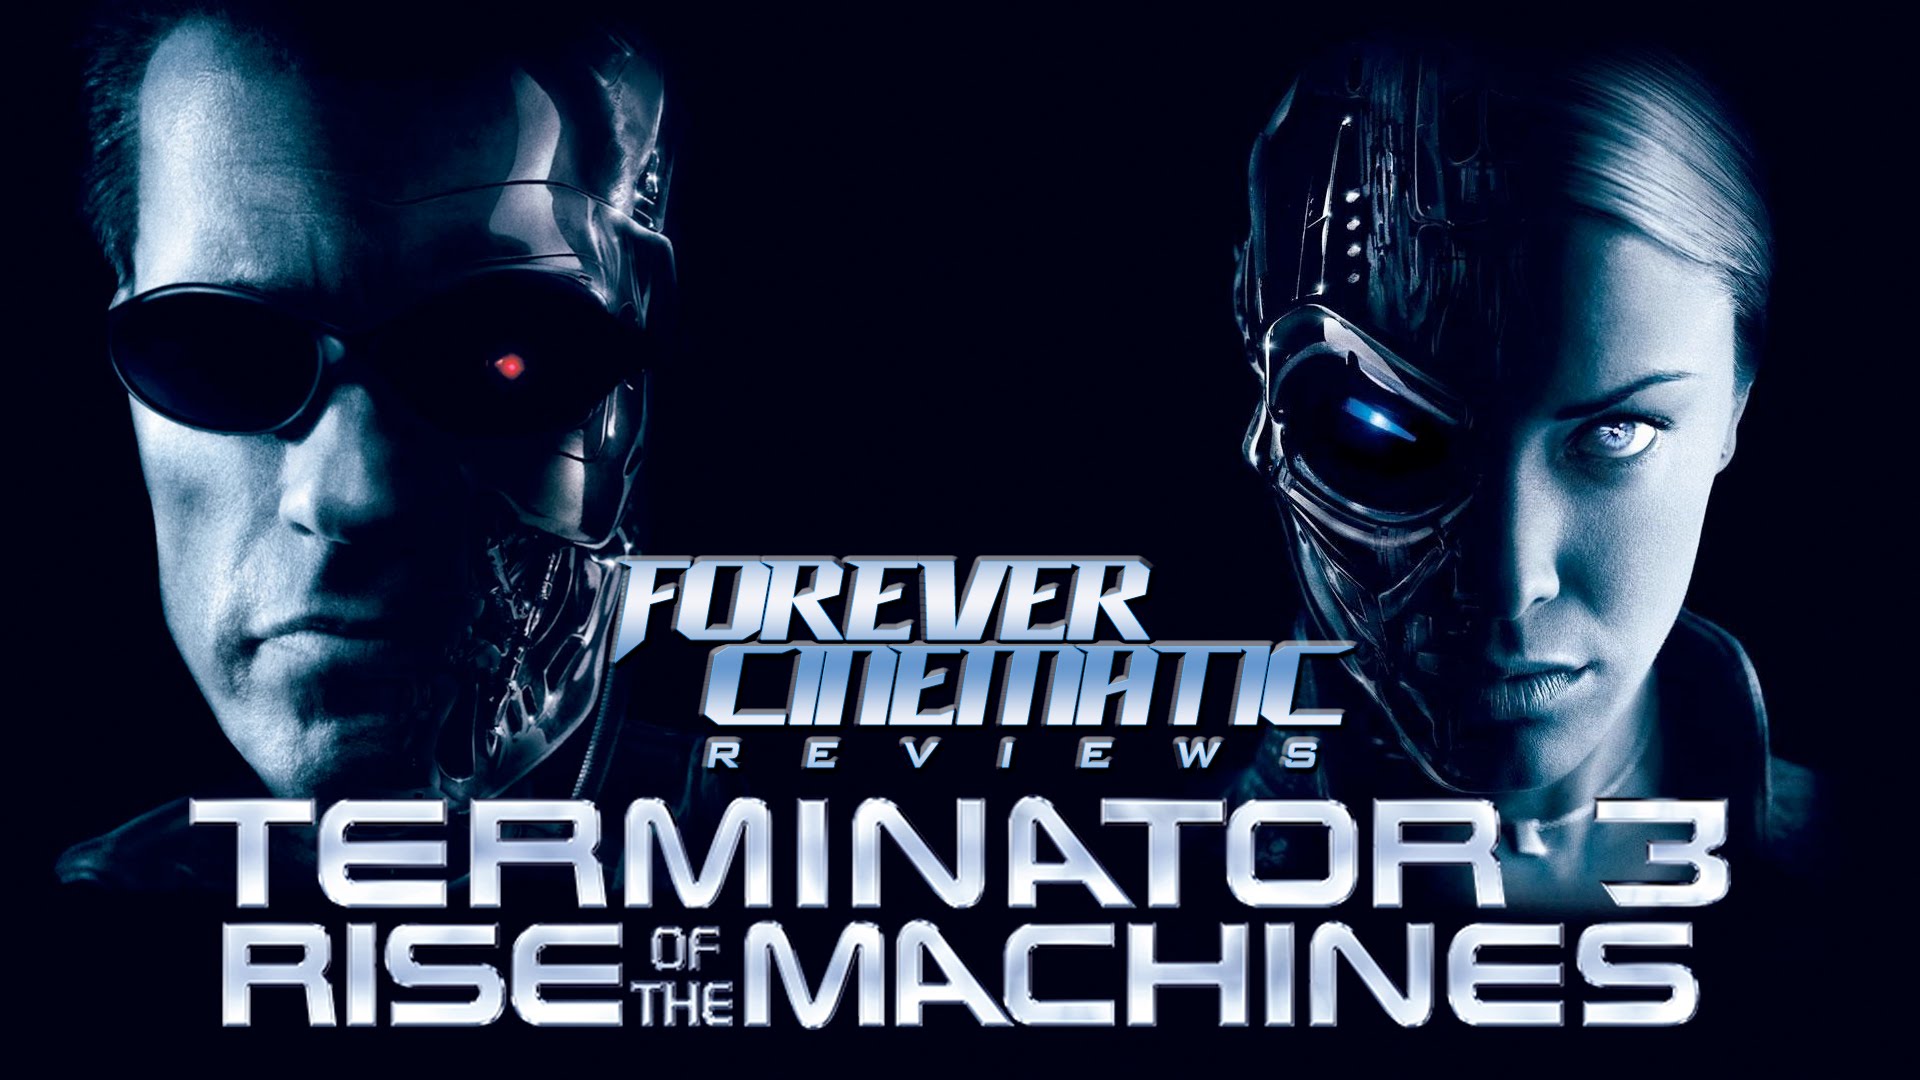 Terminator 3: Rise Of The Machines Backgrounds, Compatible - PC, Mobile, Gadgets| 1920x1080 px